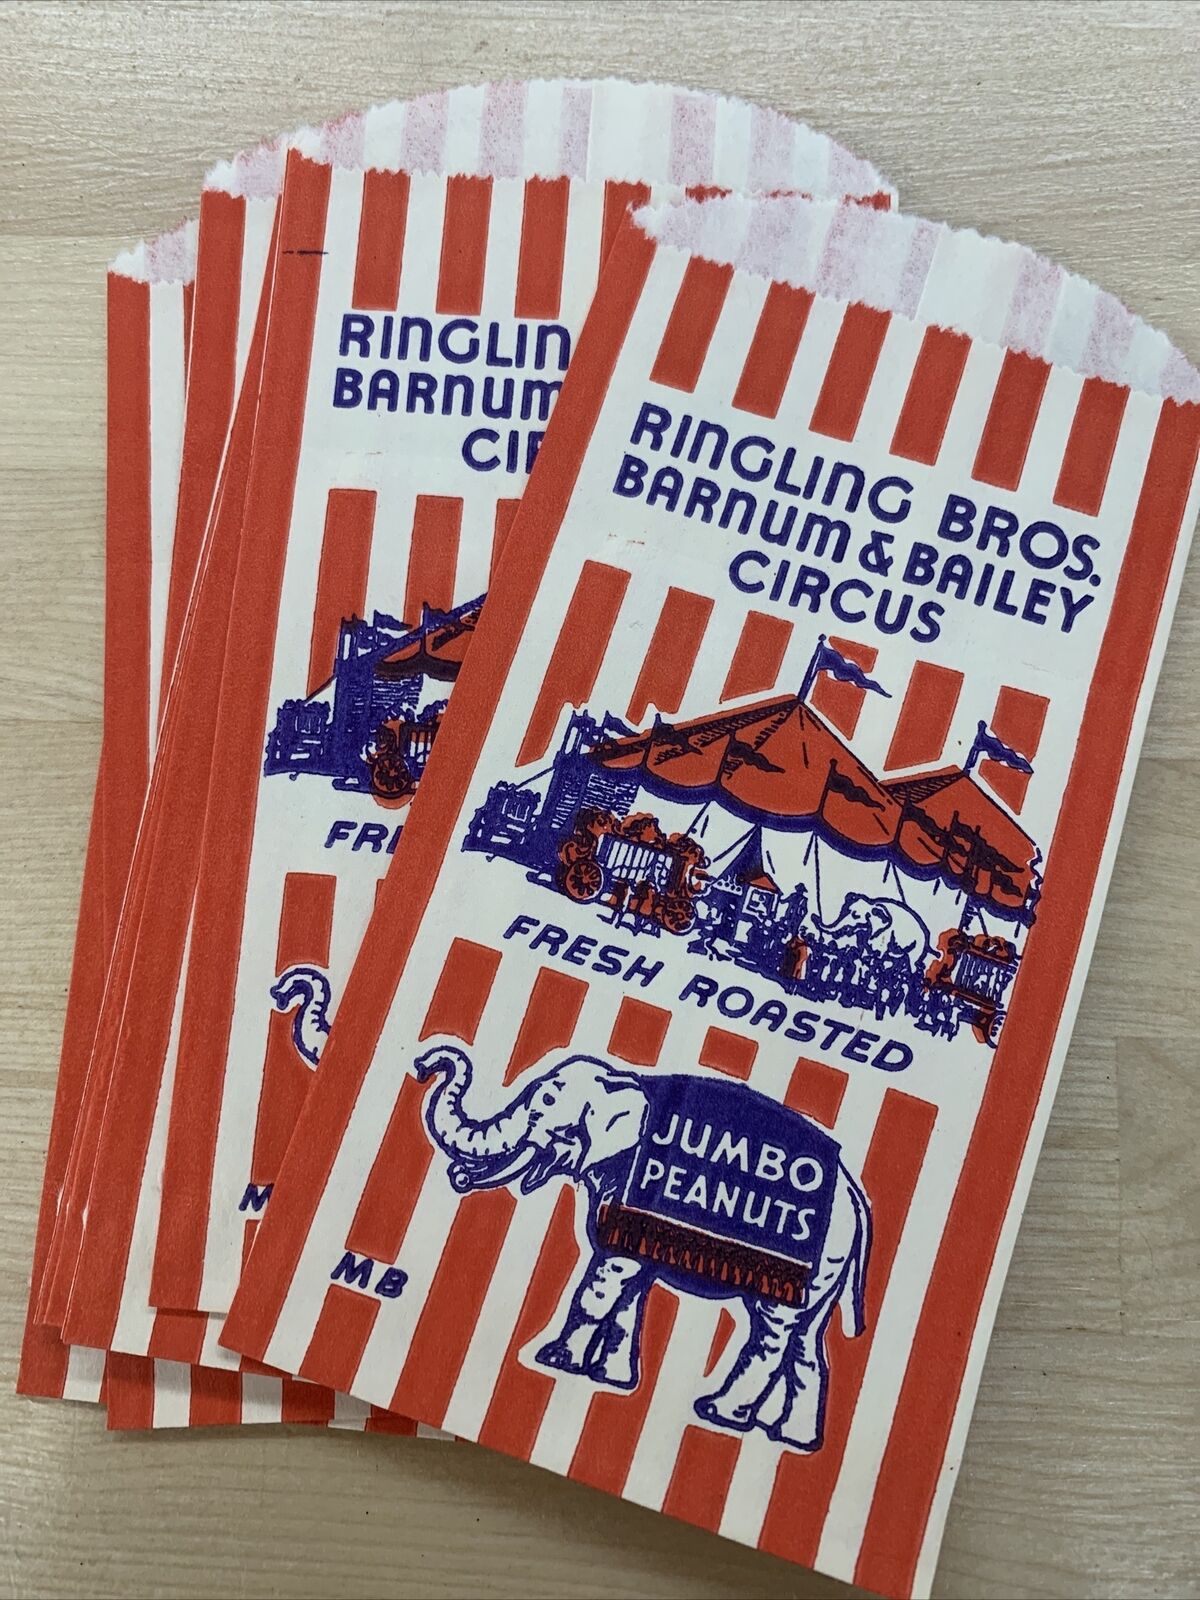 Lot of 10 Old 1950's RINGLING Bros. CIRCUS - Nuts Bags - BARNUM BAILEY